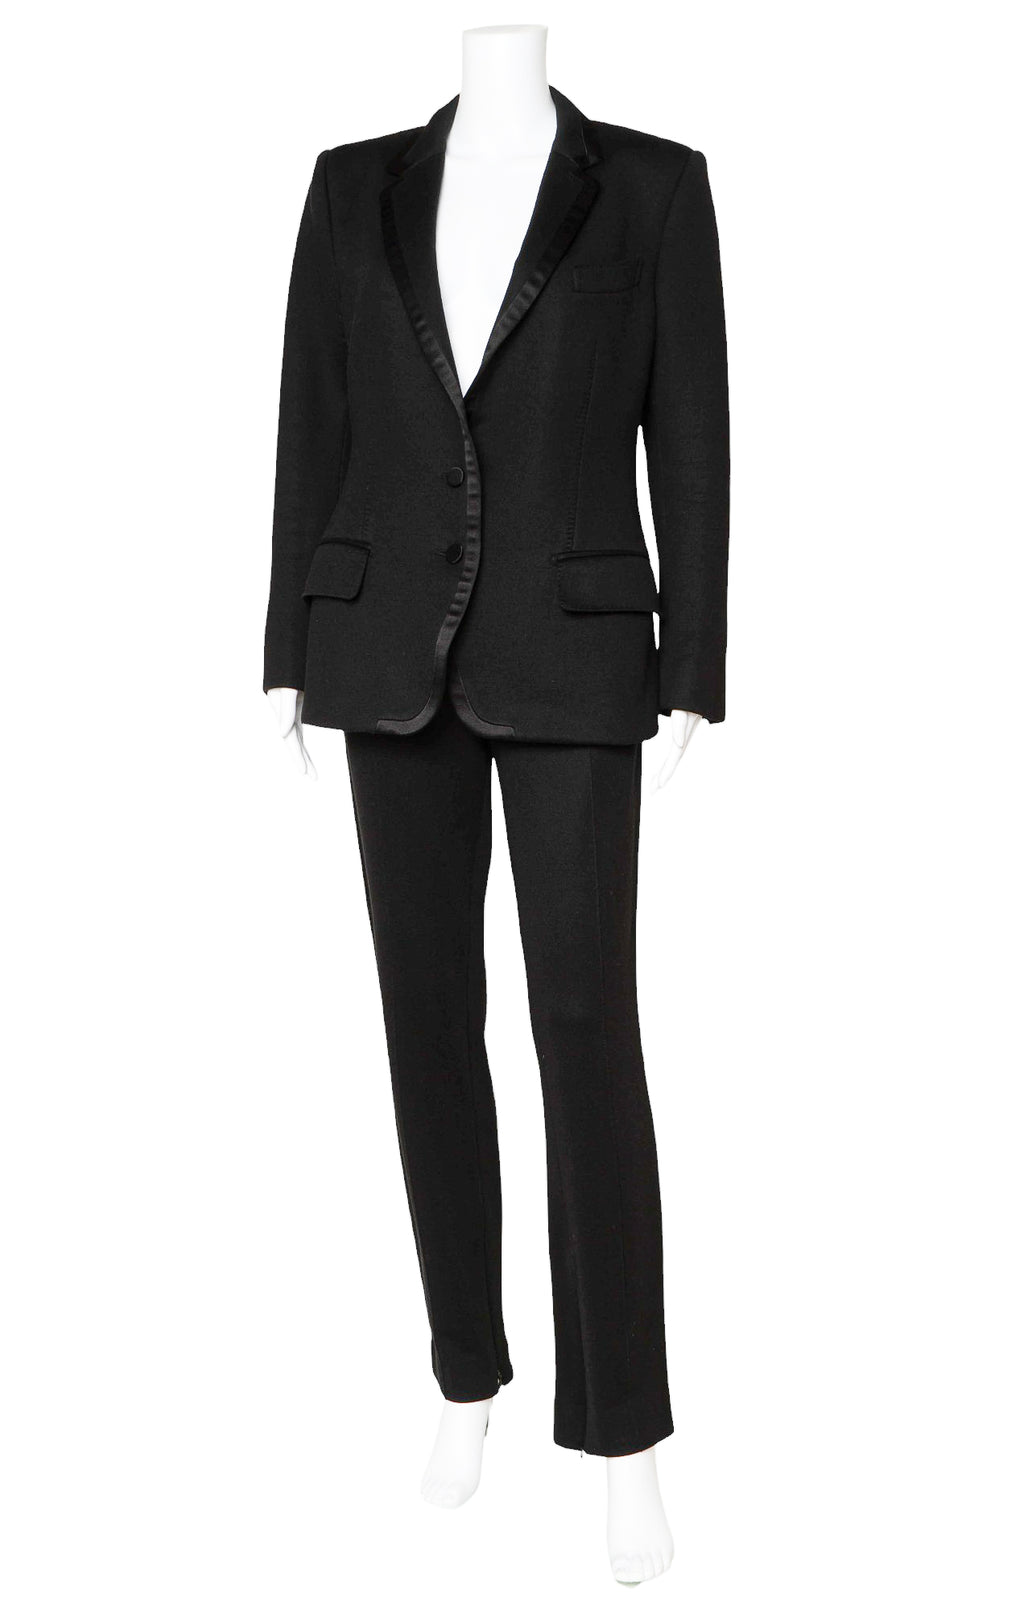 TOM FORD (RARE) Suit Size: Jacket - IT 44 / Comparable to US 6-8 Pants - No size tags, fit like US 6